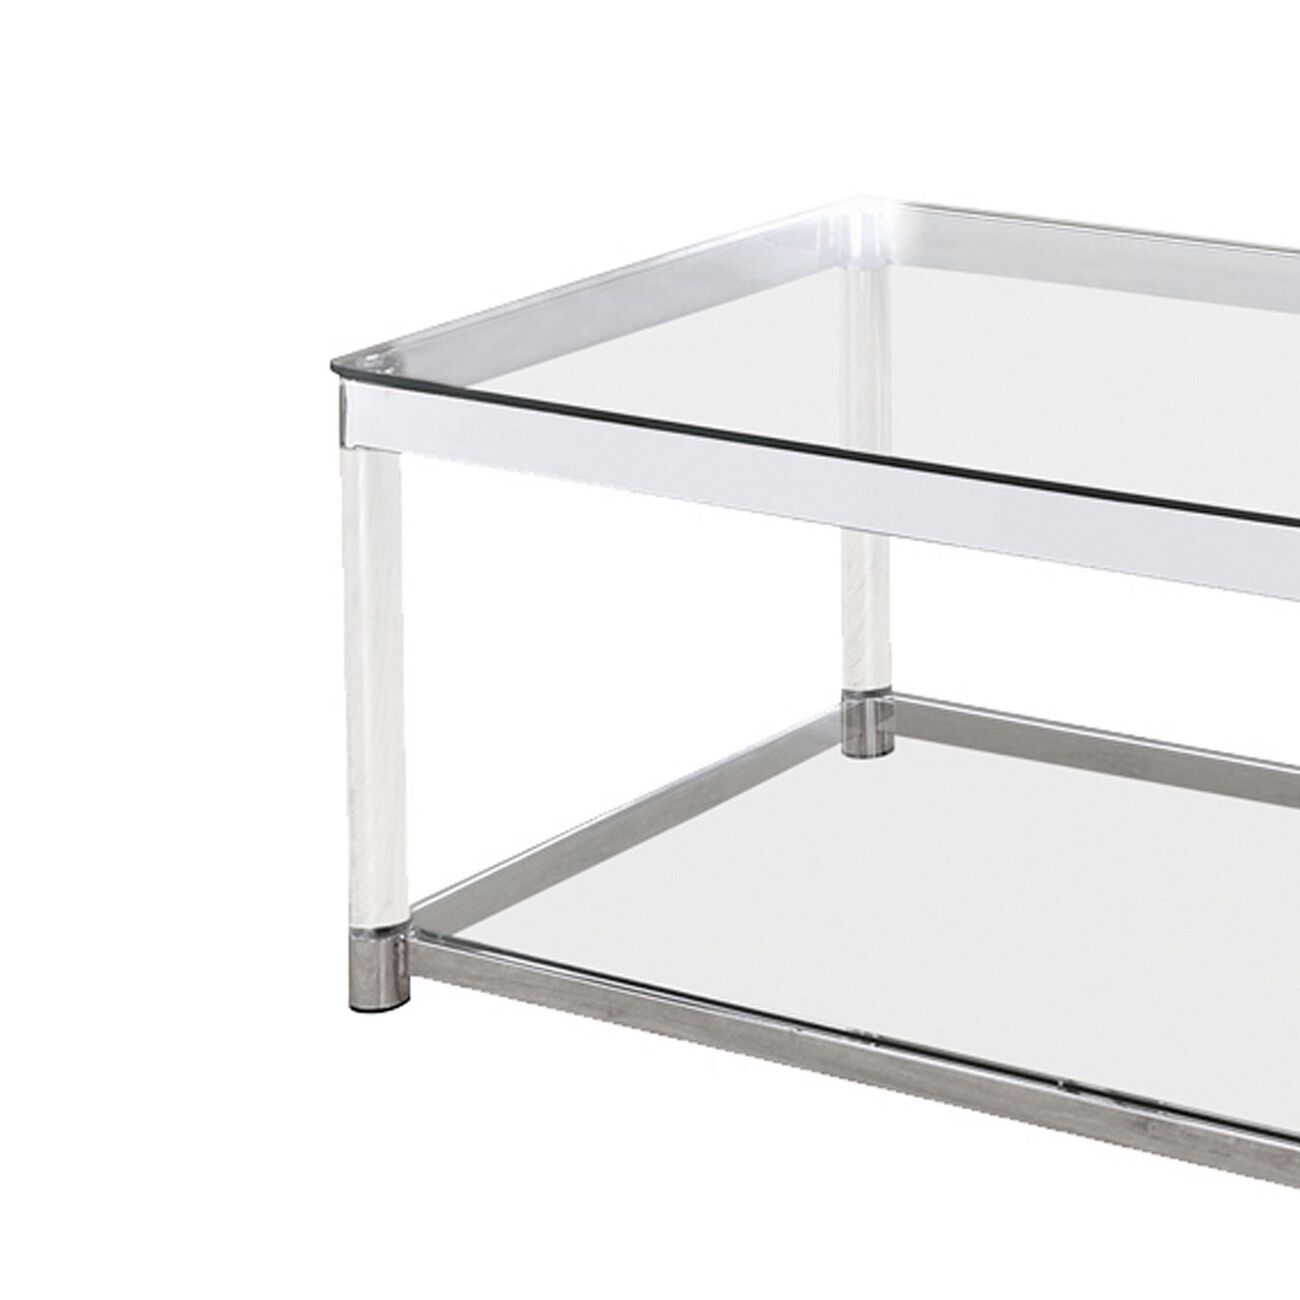 Acrylic Frame Coffee Table with Glass Top and Bottom Shelf,Clear and Chrome